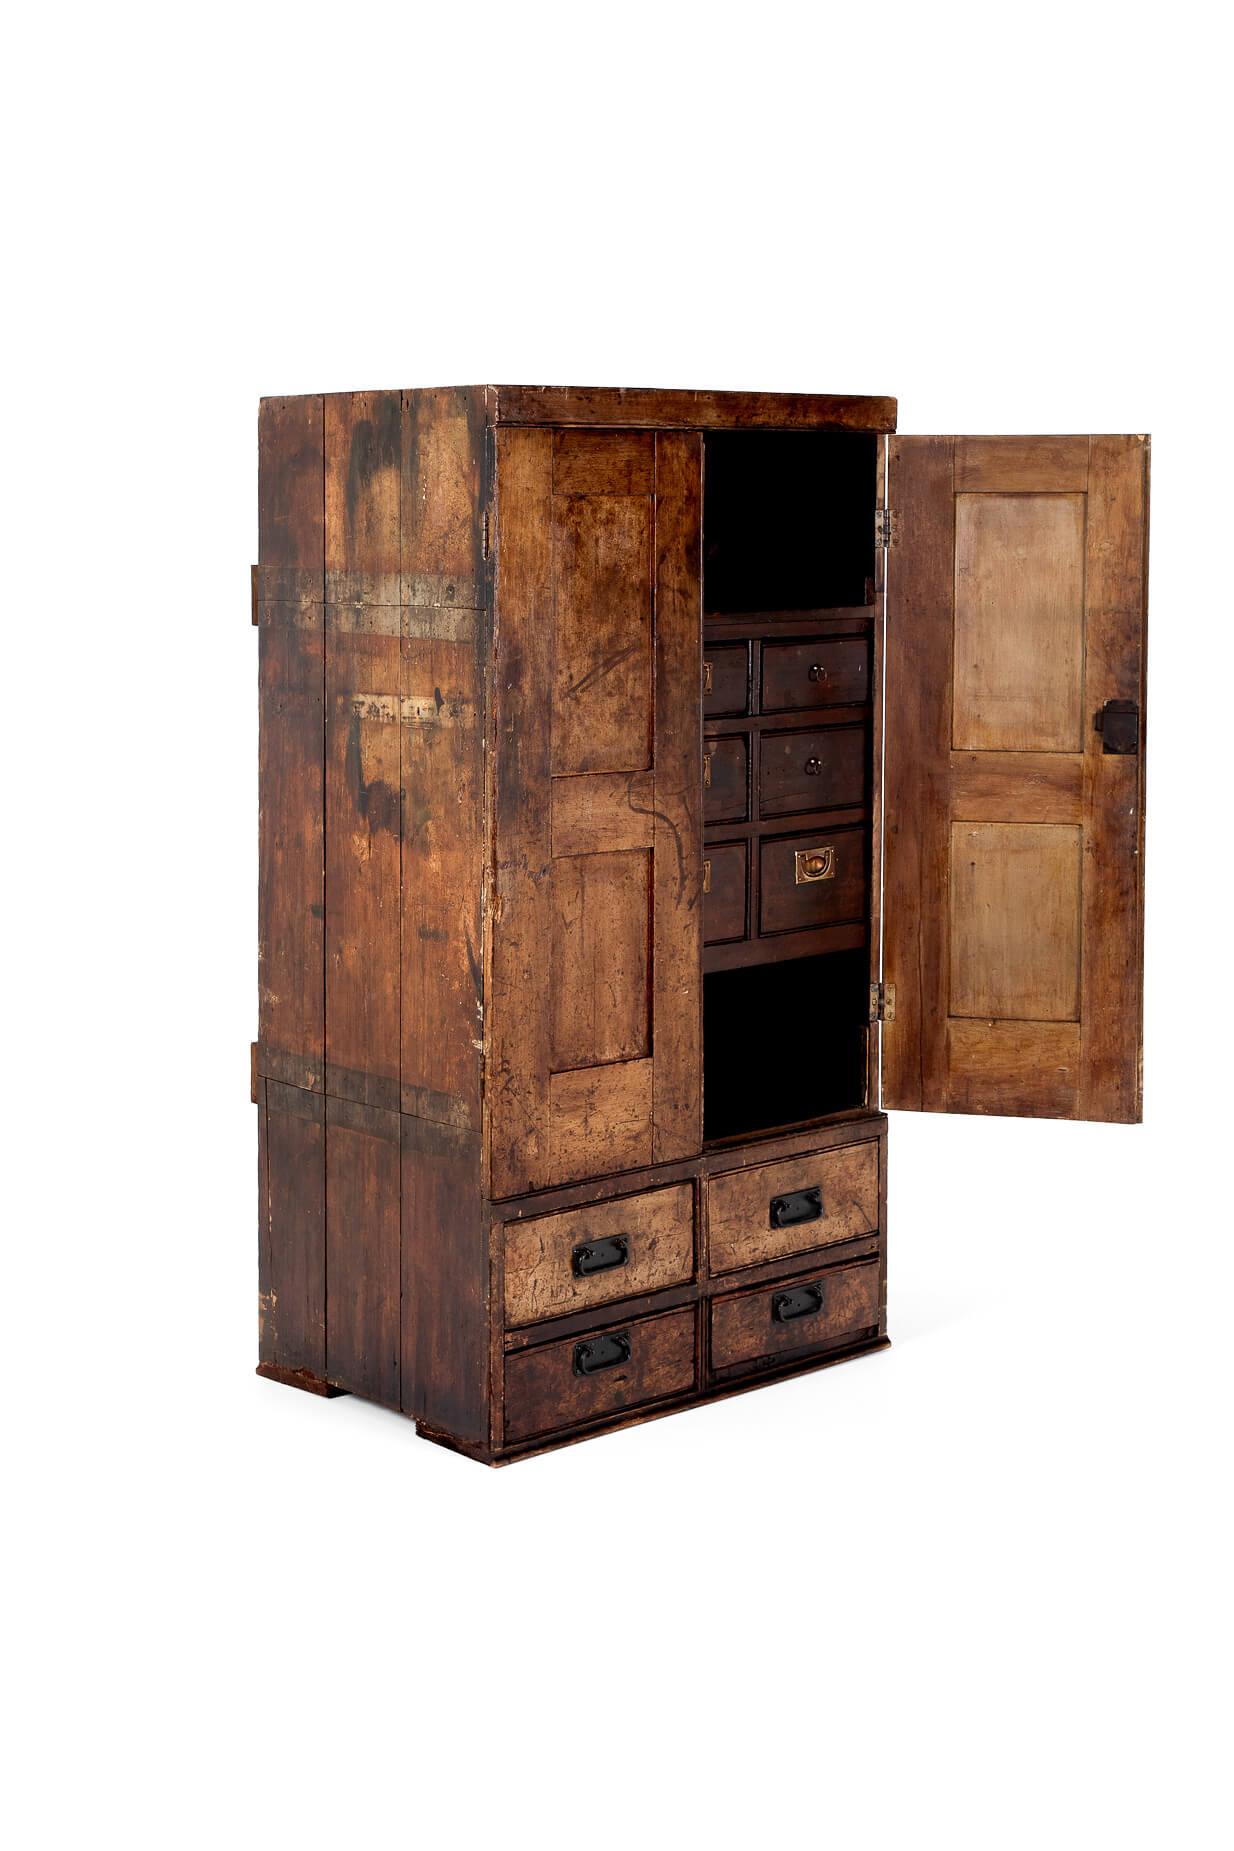 An oak watch makers cabinet from a family jewelry shop in the West Midlands that specialised in watch movements and repairs.

The top cupboard section has a pair of doors with original closing latches that open to a wide open shelf above a bank of